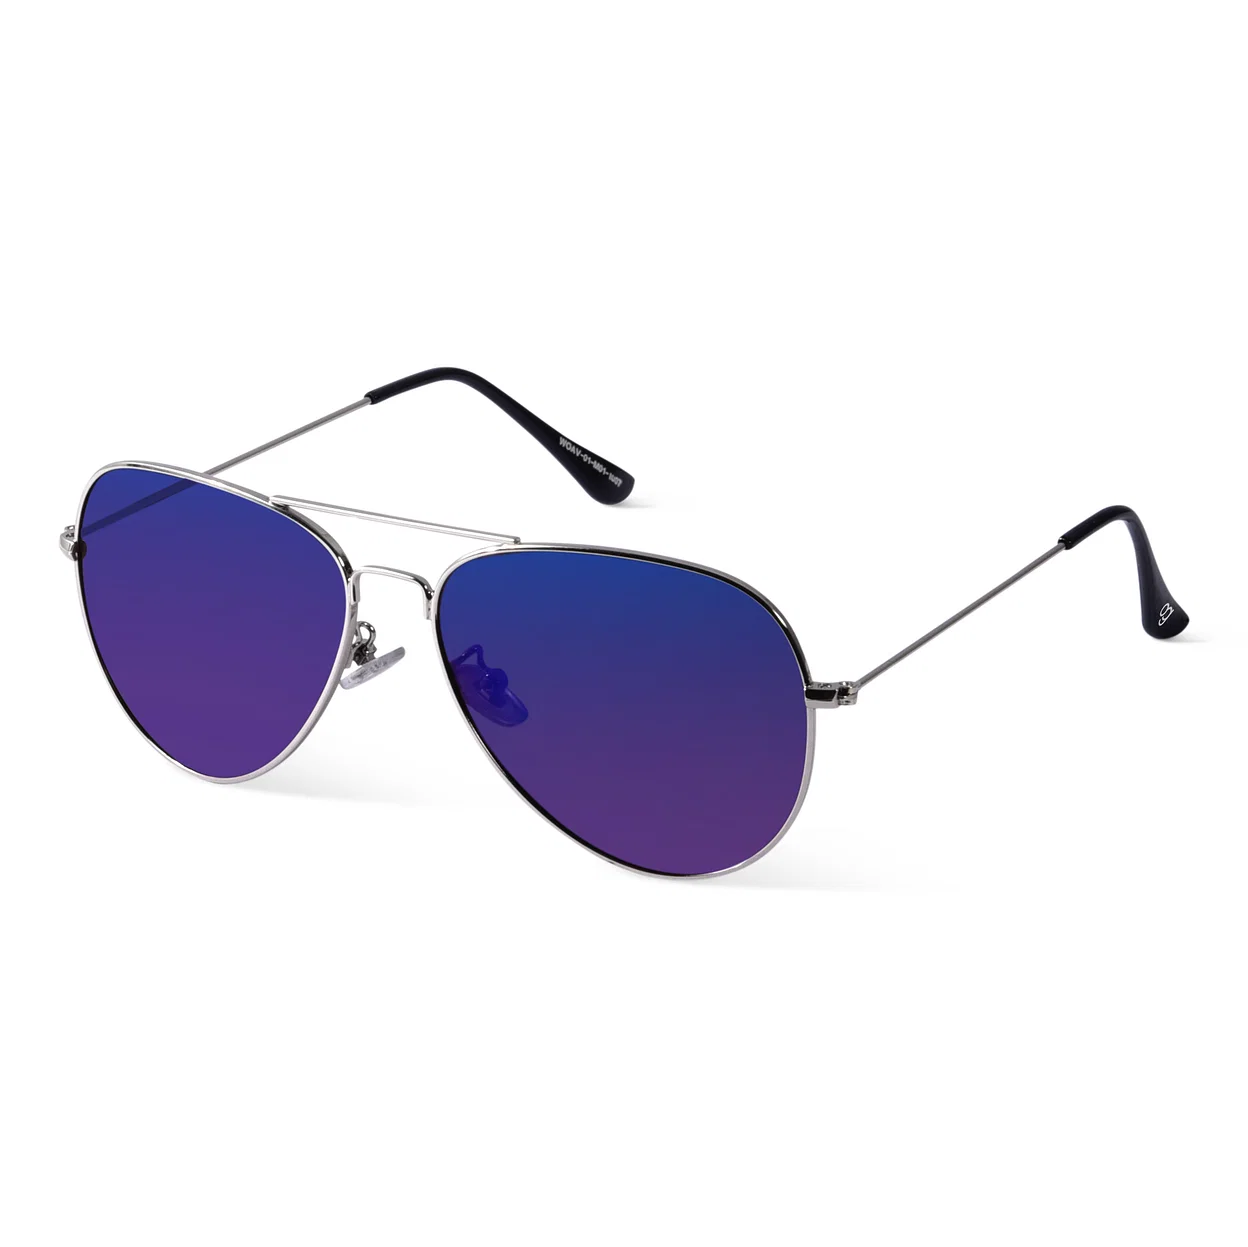 https://woggles.gumlet.io/api/catalog/products/woggles_new_image_9_12_2022/electric_blue_polarized_aviator_sunglasses_base_28-9-2023.jpg?format=webp&w=480&dpr=2.6